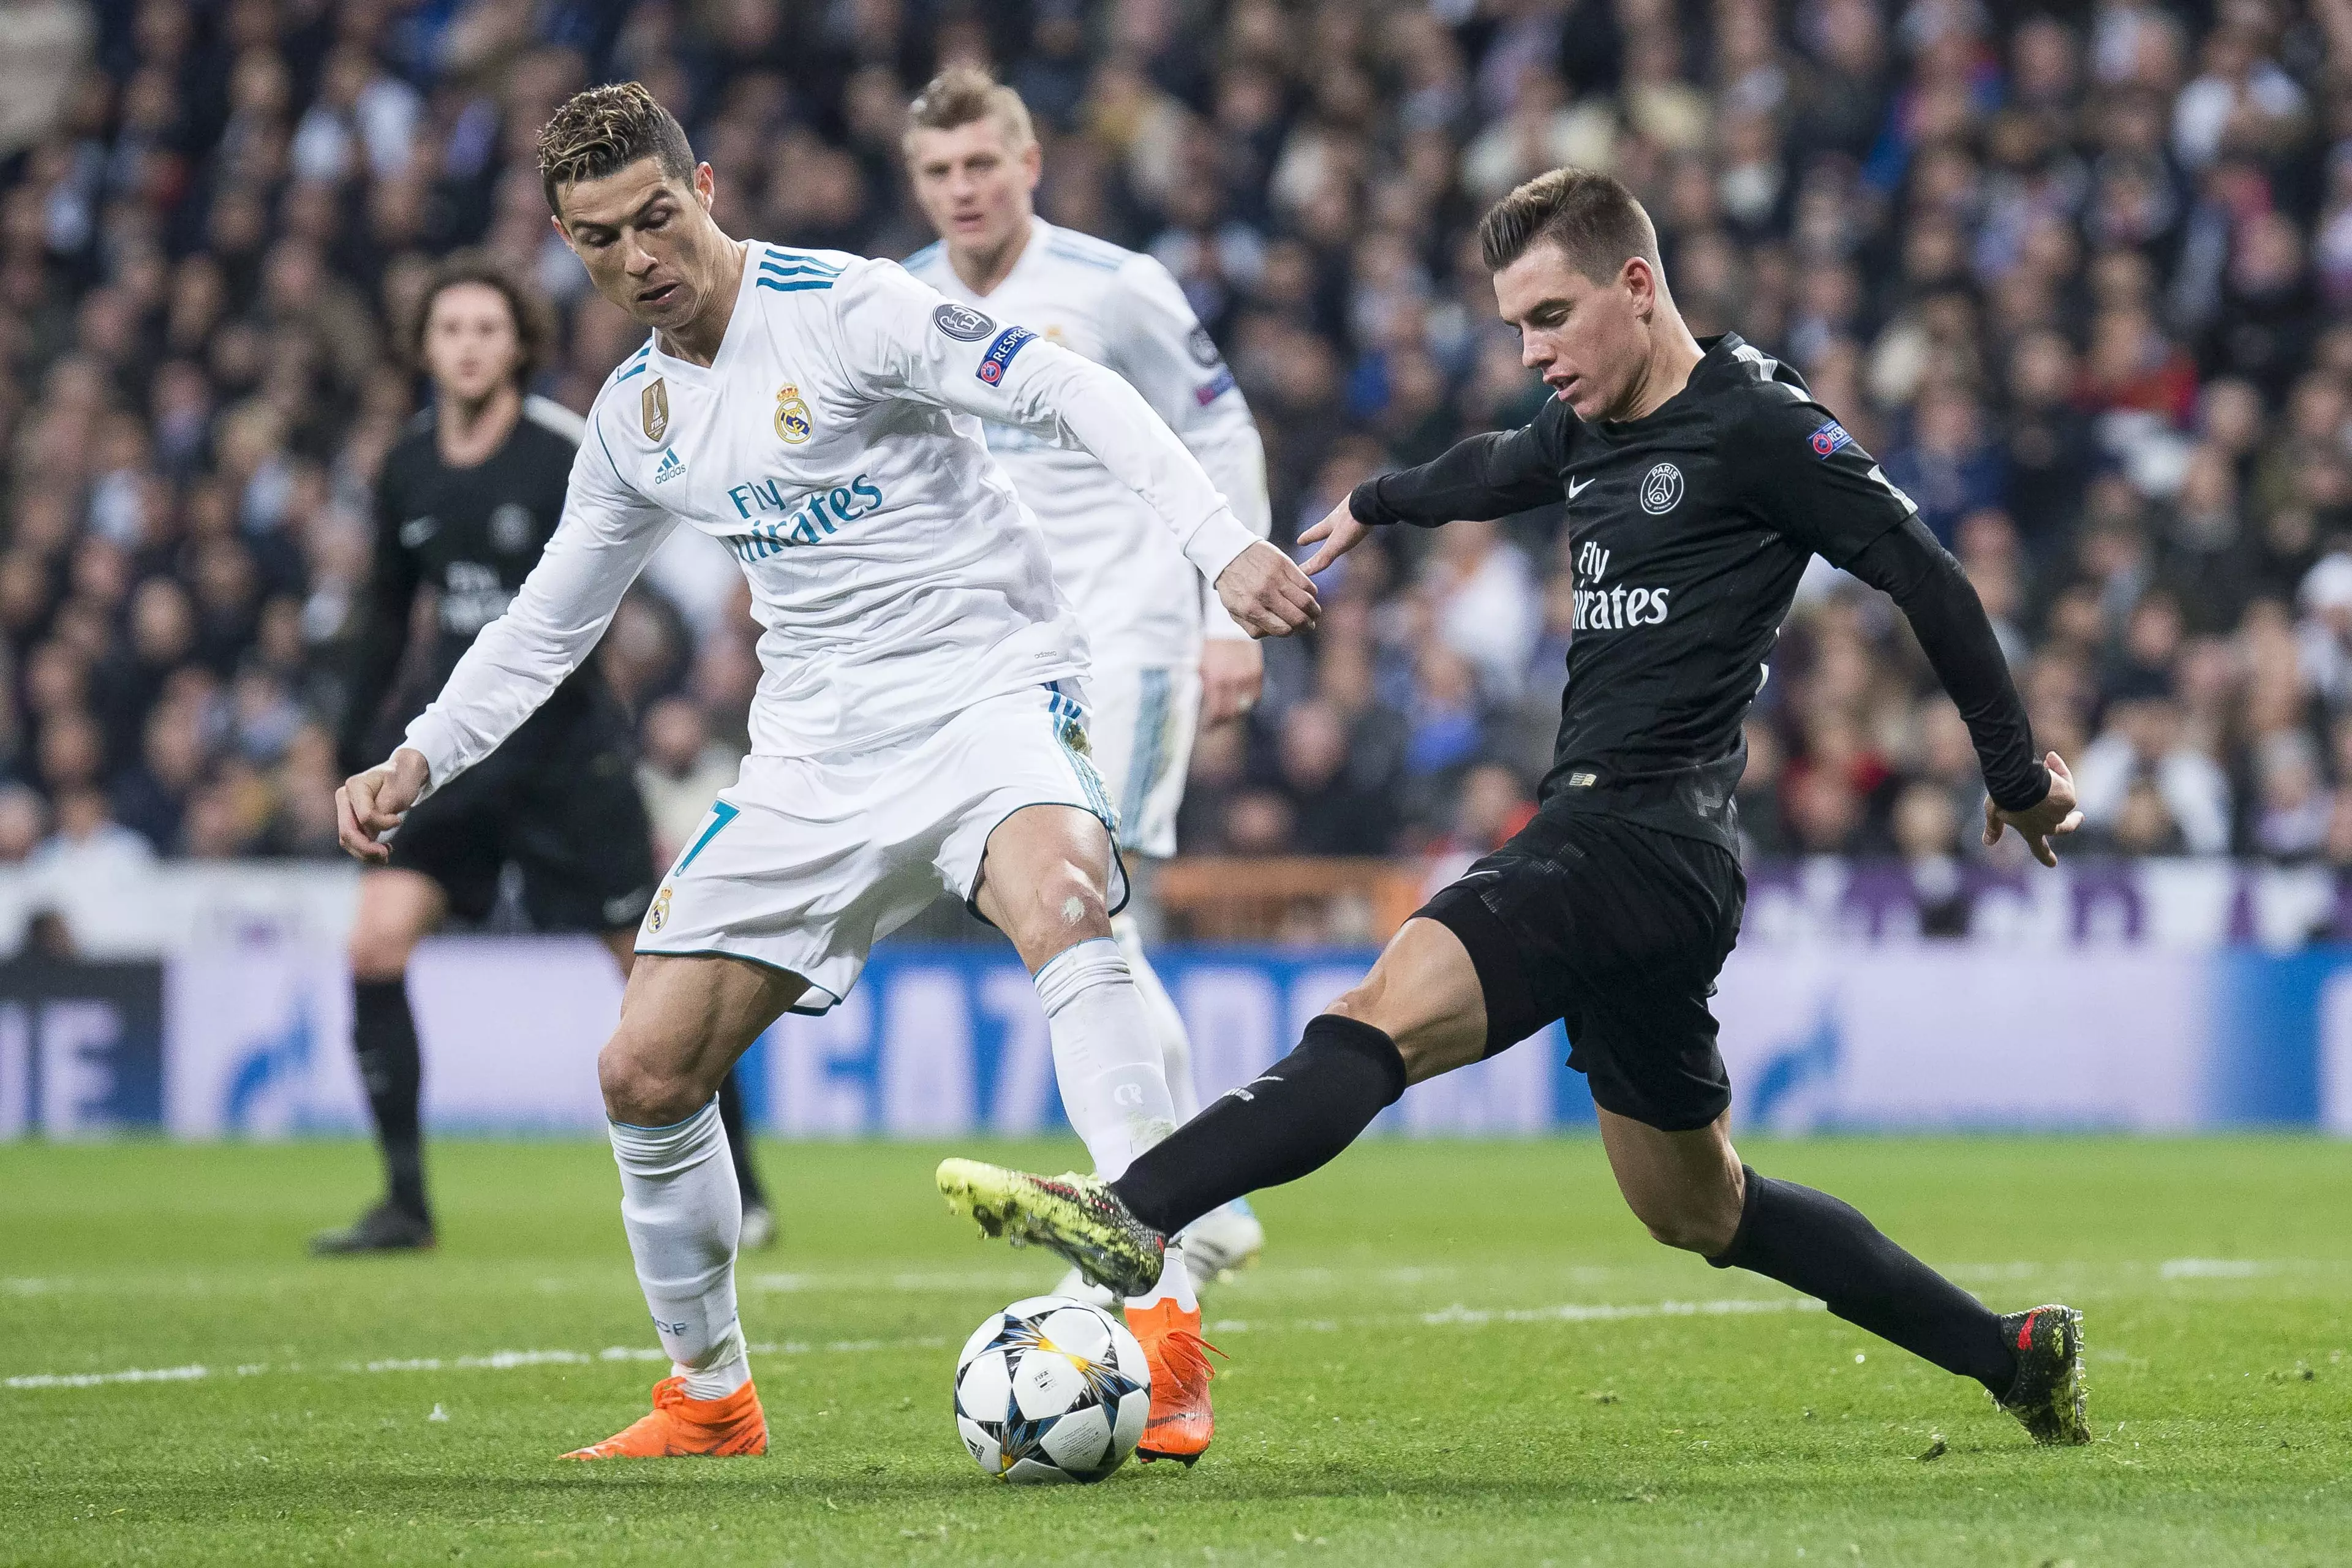 Giovani Lo Celso vying for the ball with Ronaldo. Image: PA